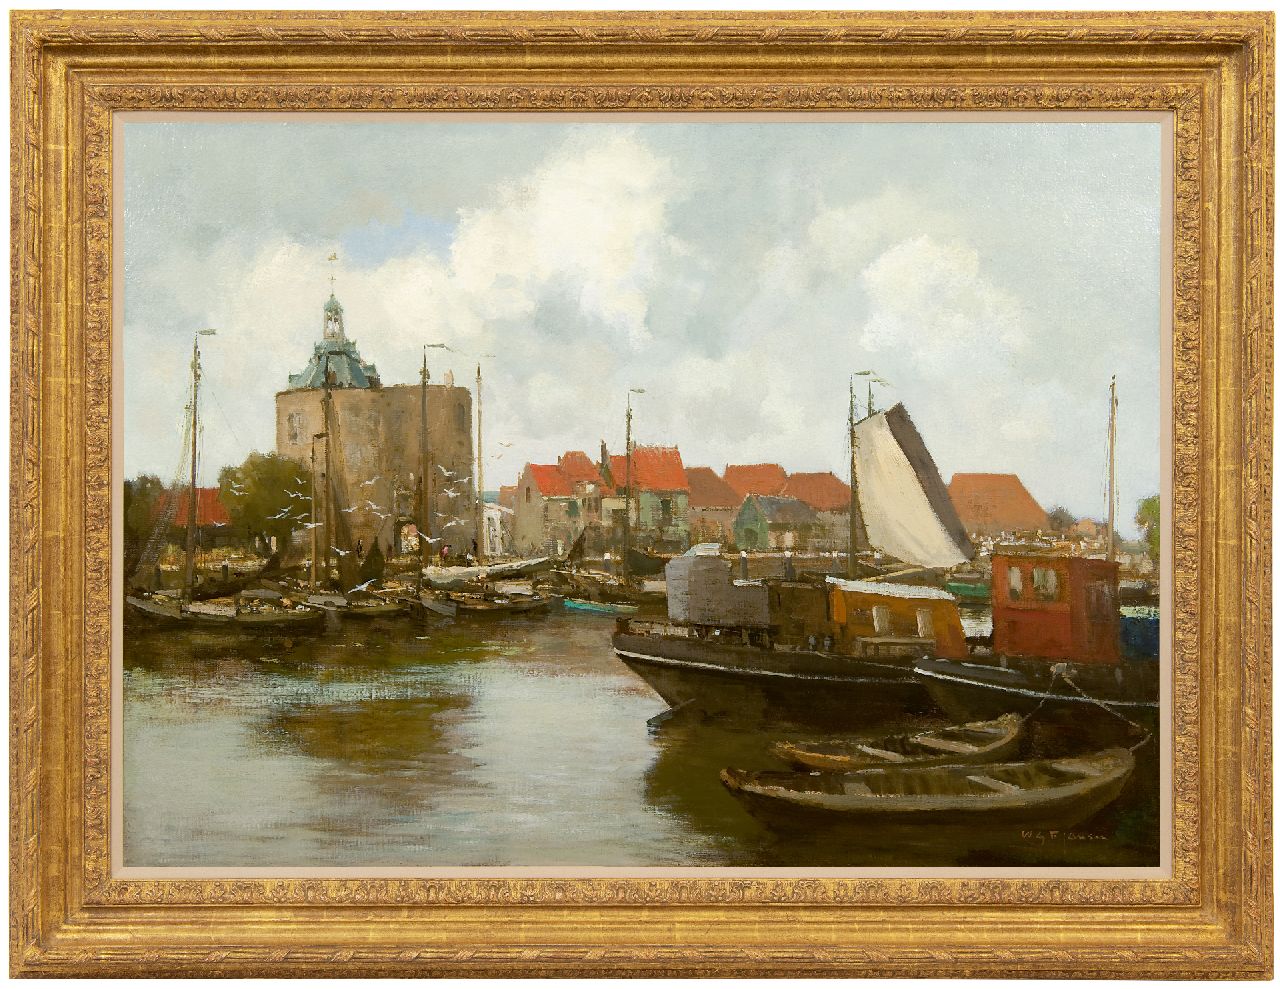 Jansen W.G.F.  | 'Willem' George Frederik Jansen | Paintings offered for sale | The harbour of Enkhuizen with the Drommedaris tower, oil on canvas 71.8 x 99.3 cm, signed l.r.